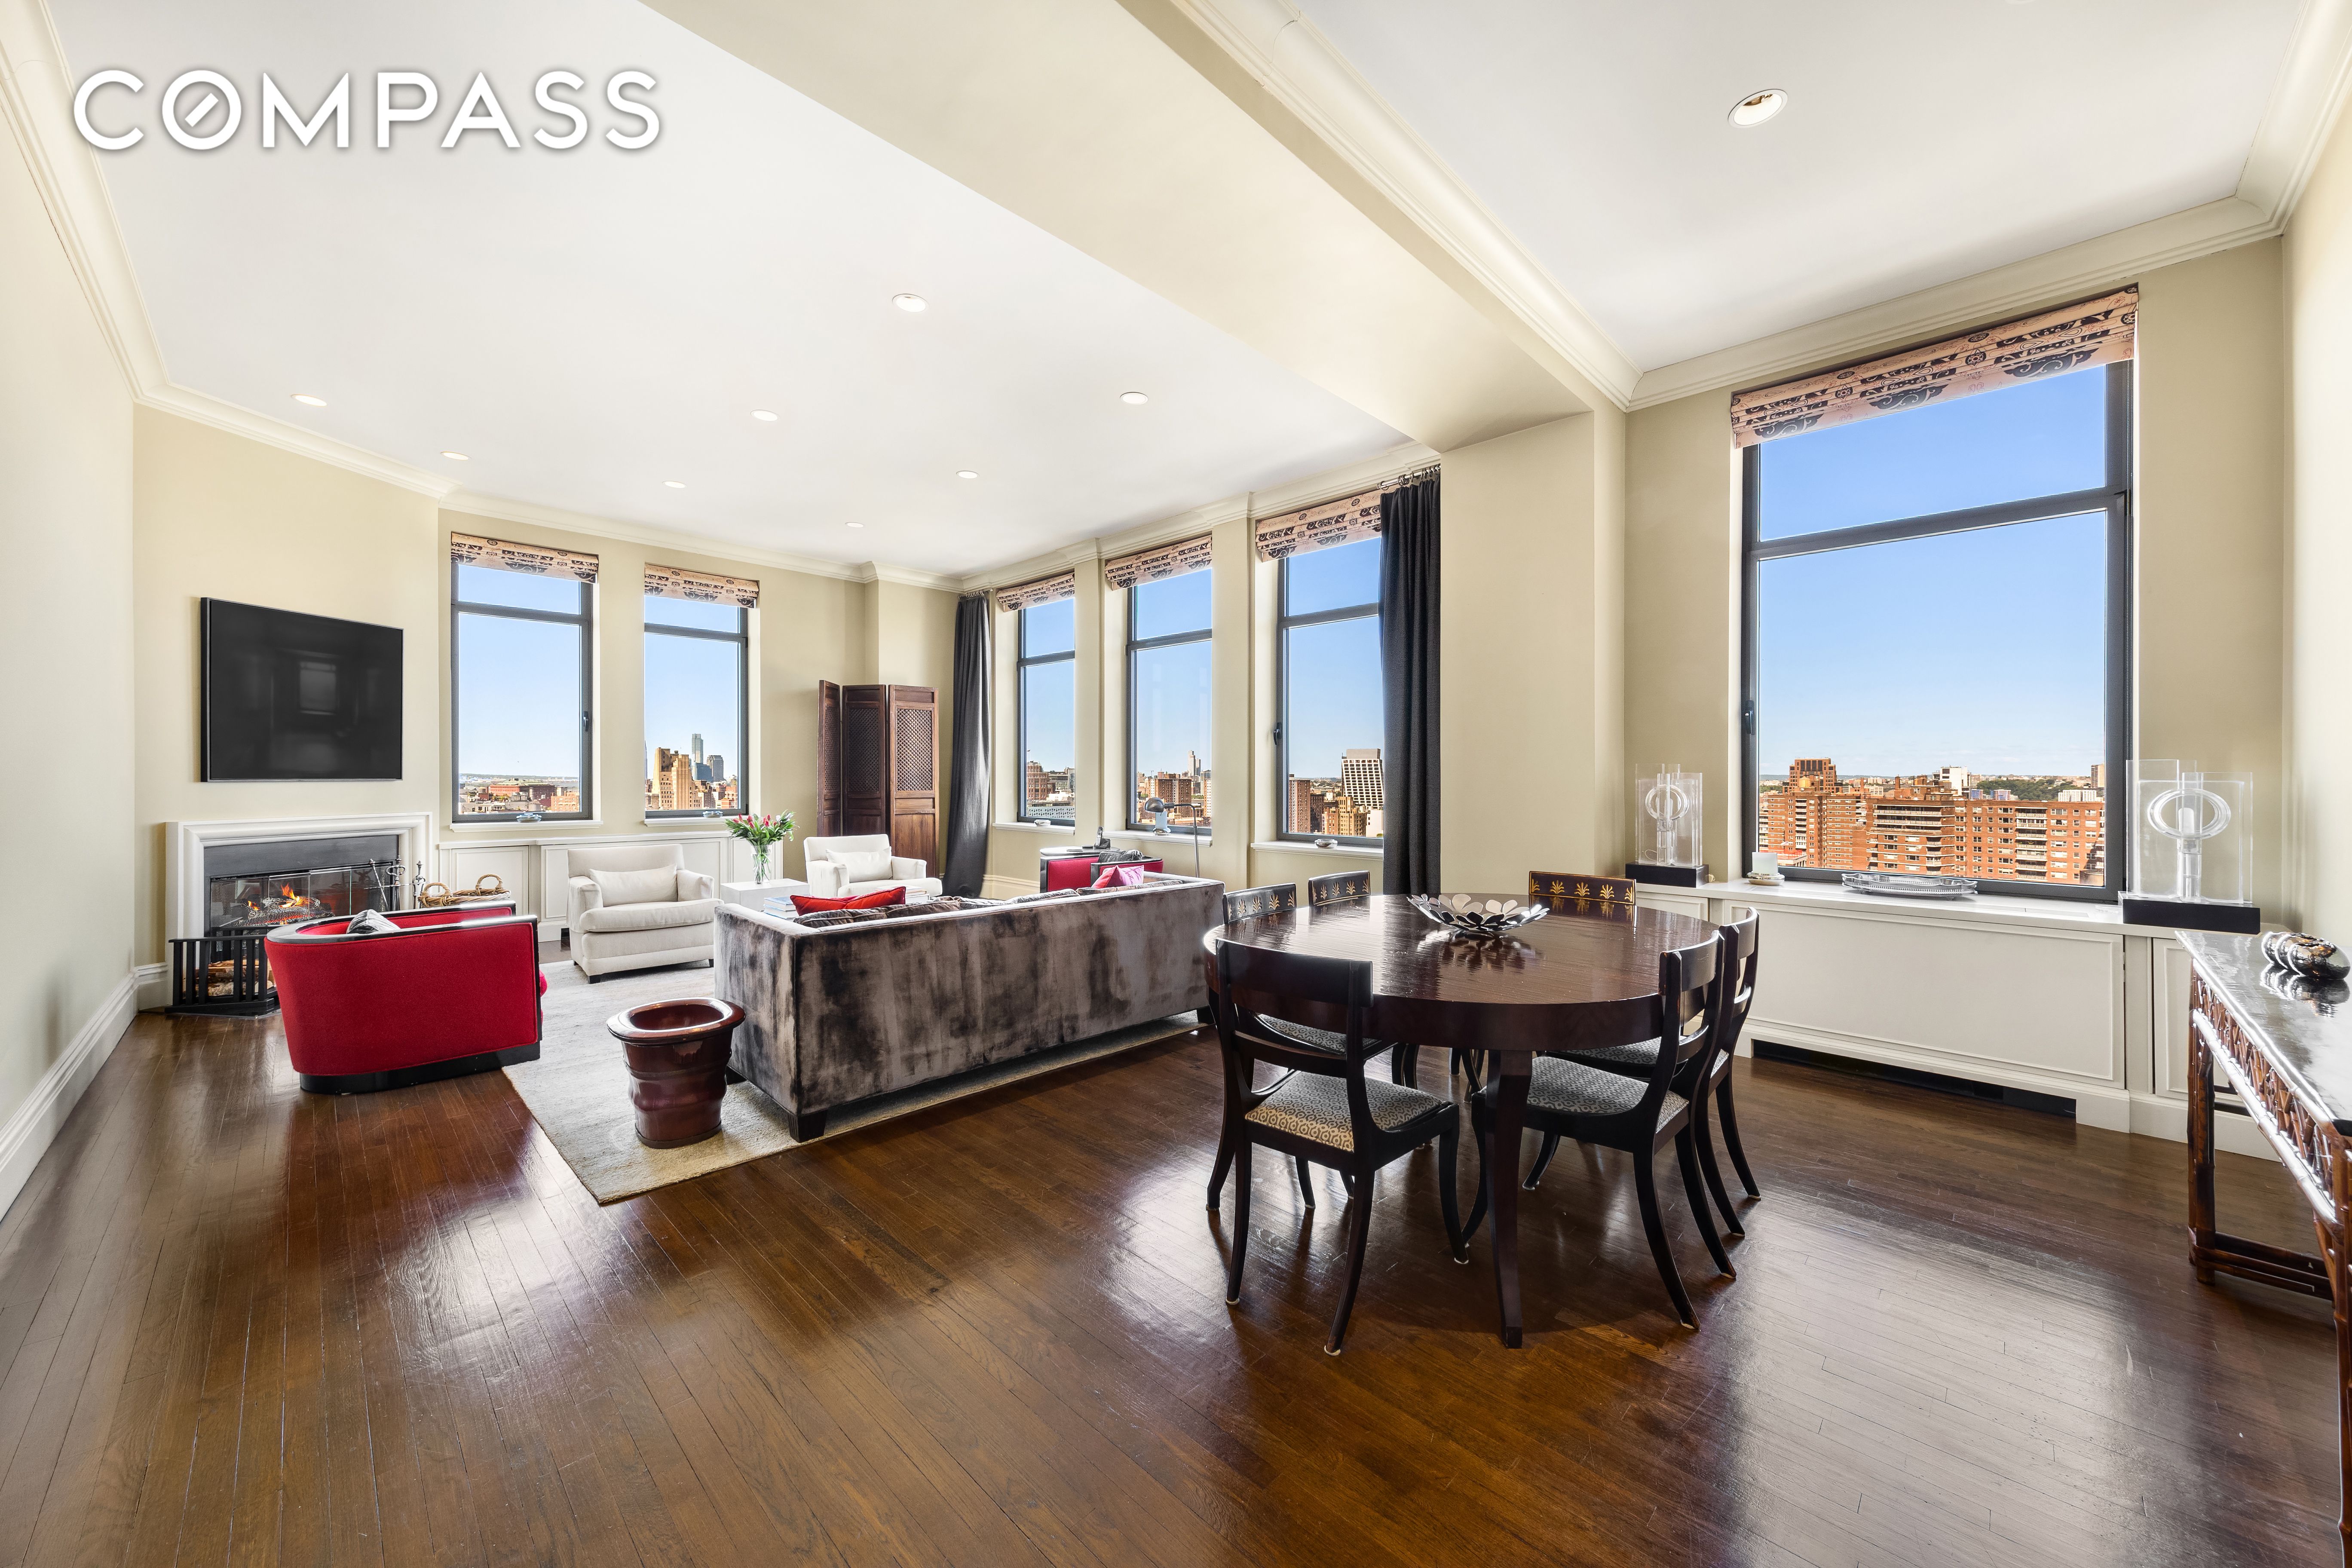 252 7th Avenue Php, Chelsea, Downtown, NYC - 3 Bedrooms  
3.5 Bathrooms  
6 Rooms - 